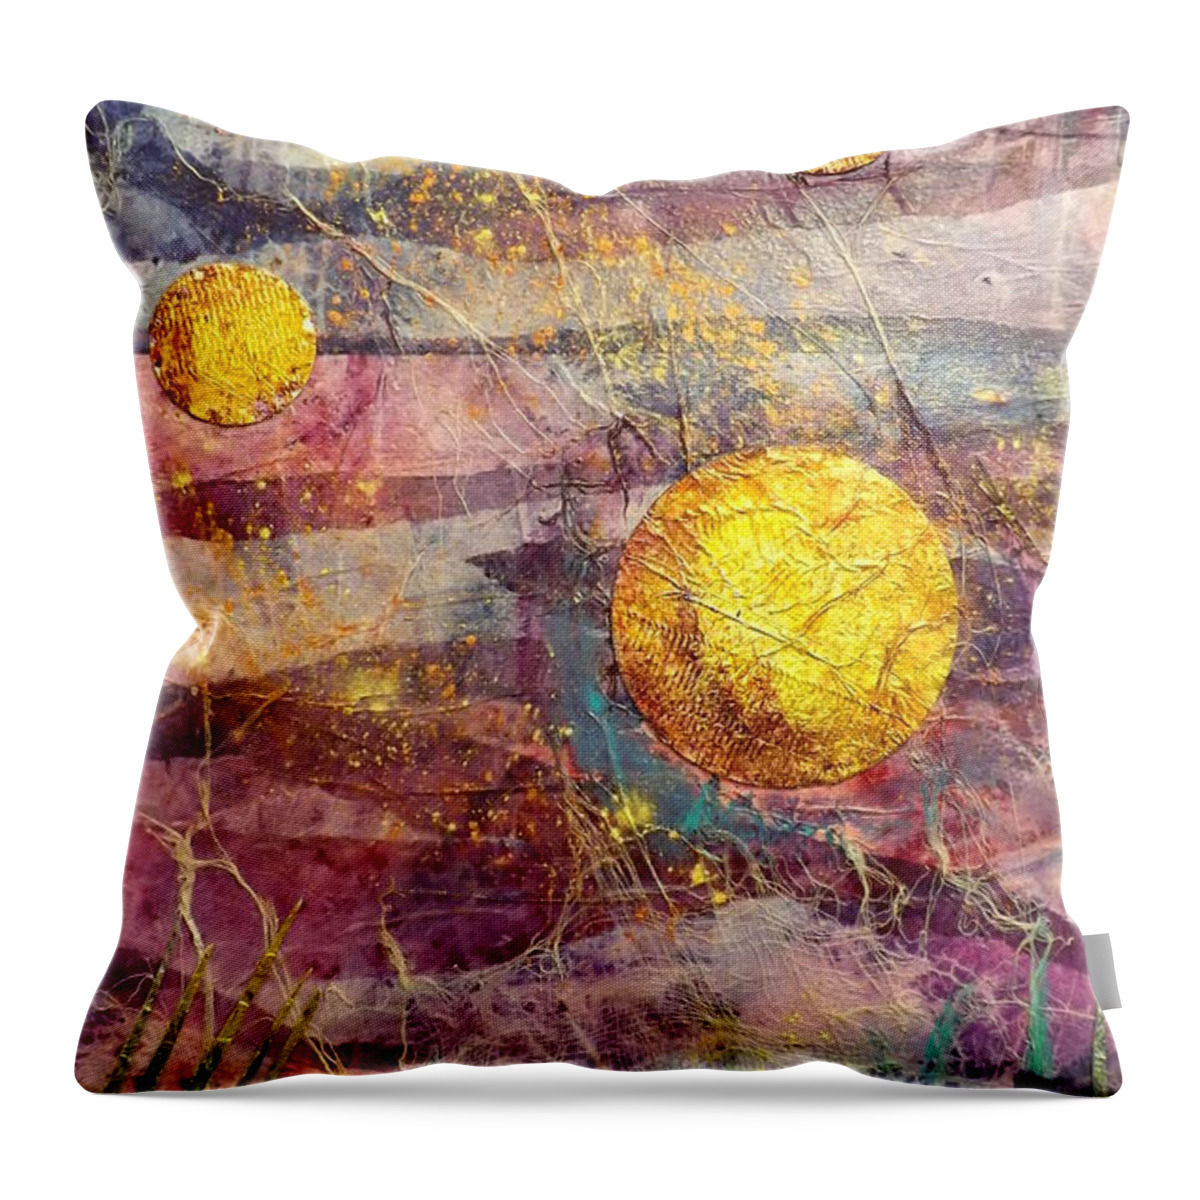 Underwater Universe Throw Pillow featuring the painting Underwater Universe by Darren Robinson